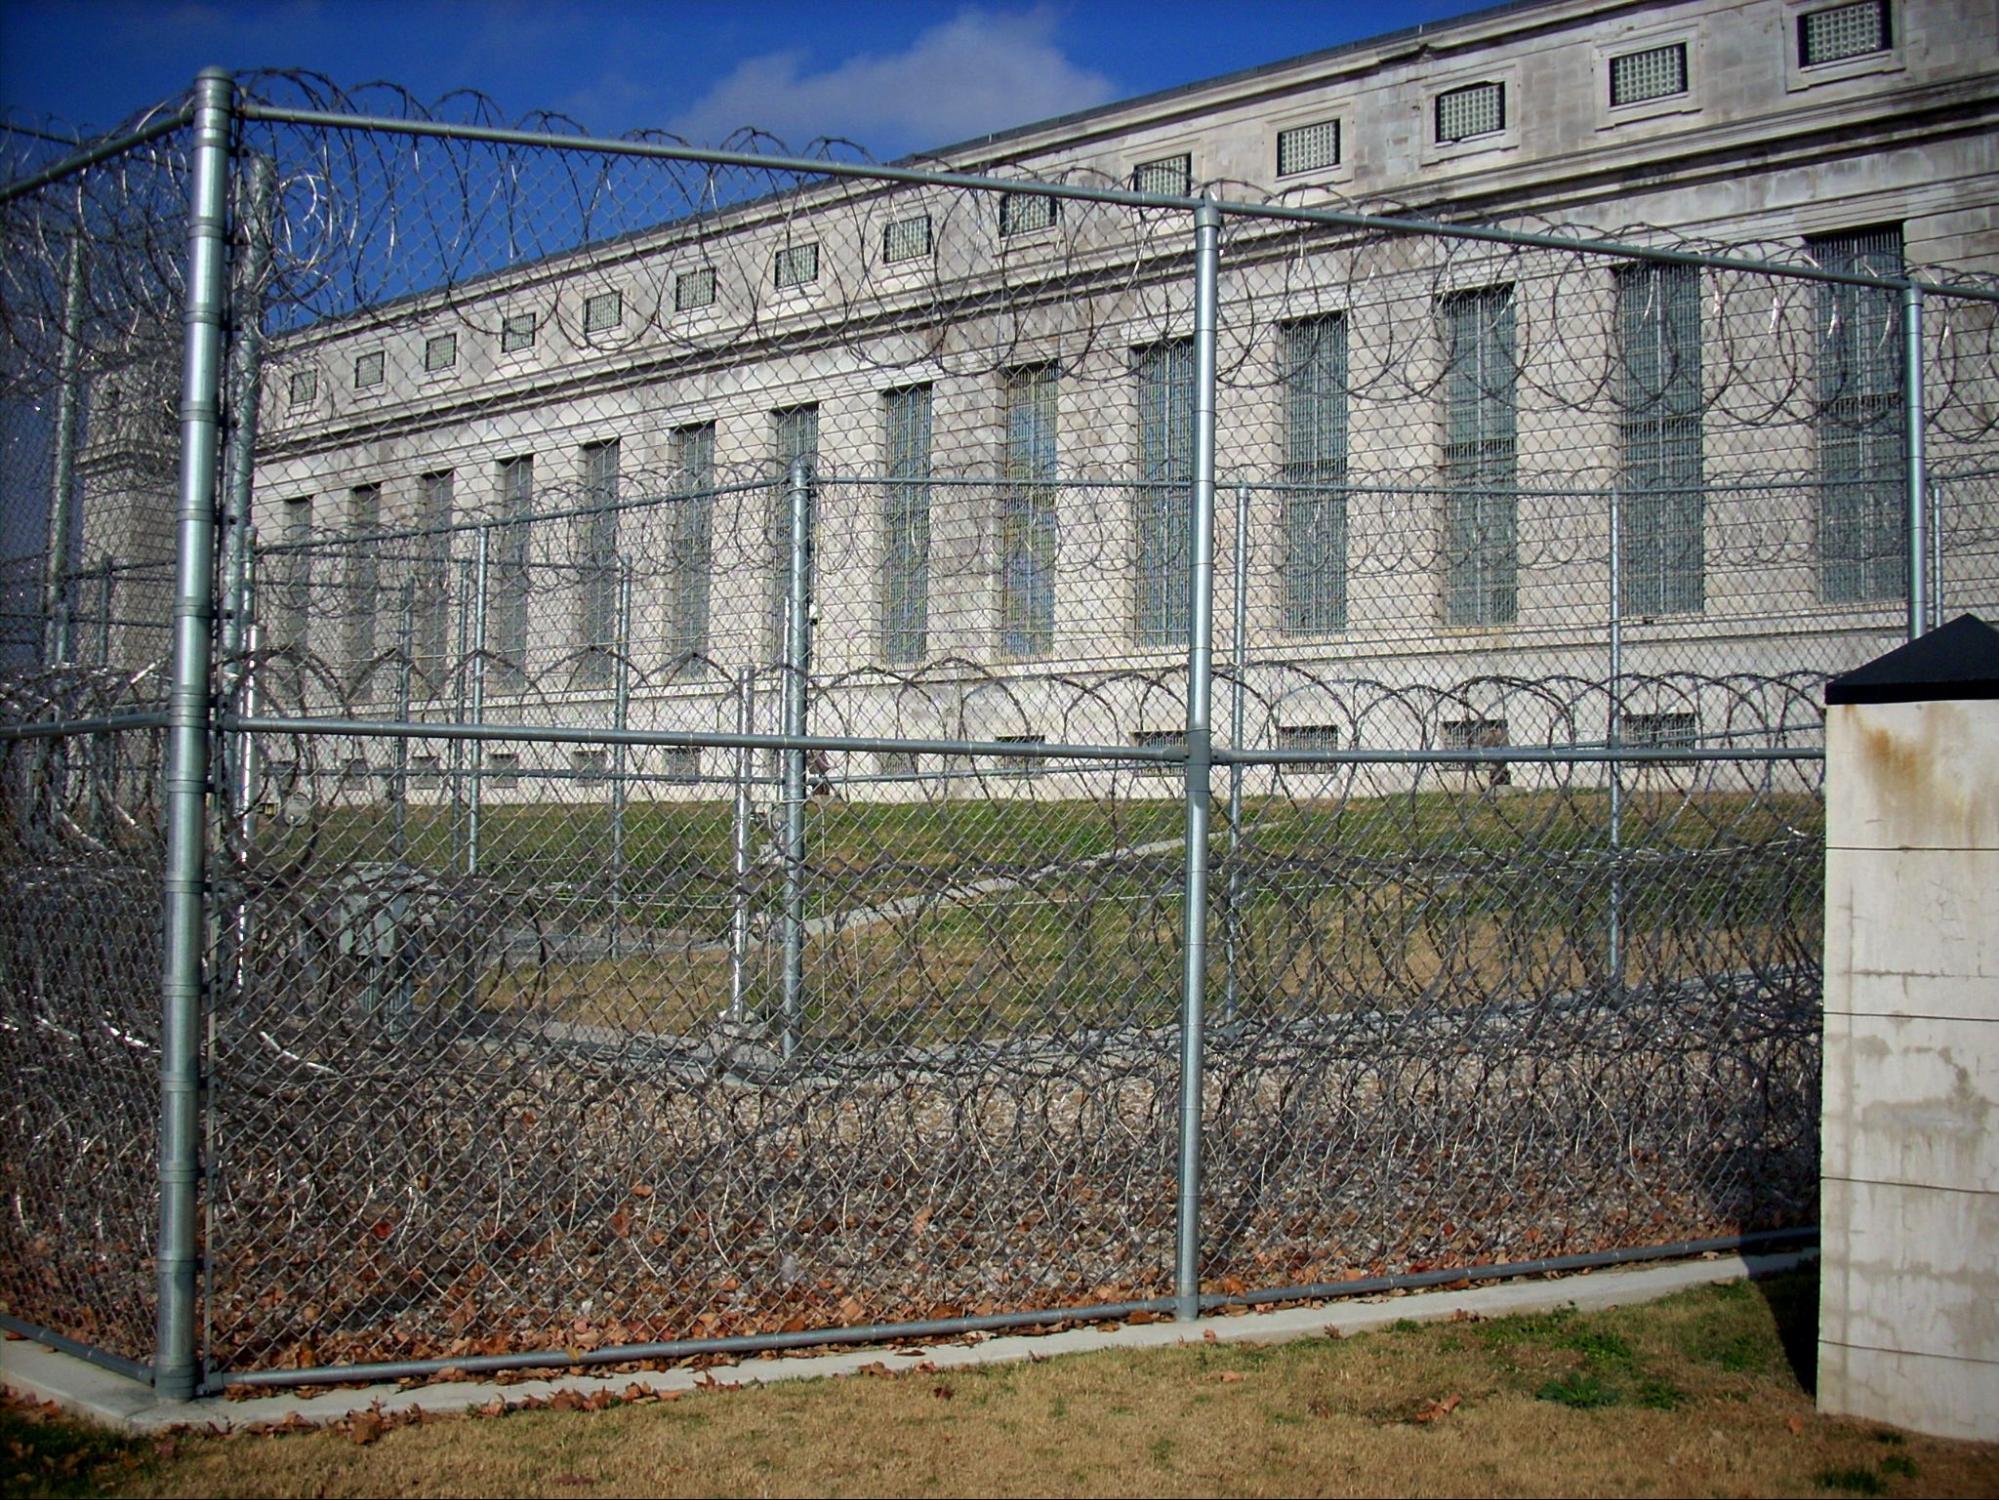 Two rows of chain length fence with razor wire enclosing the prison.